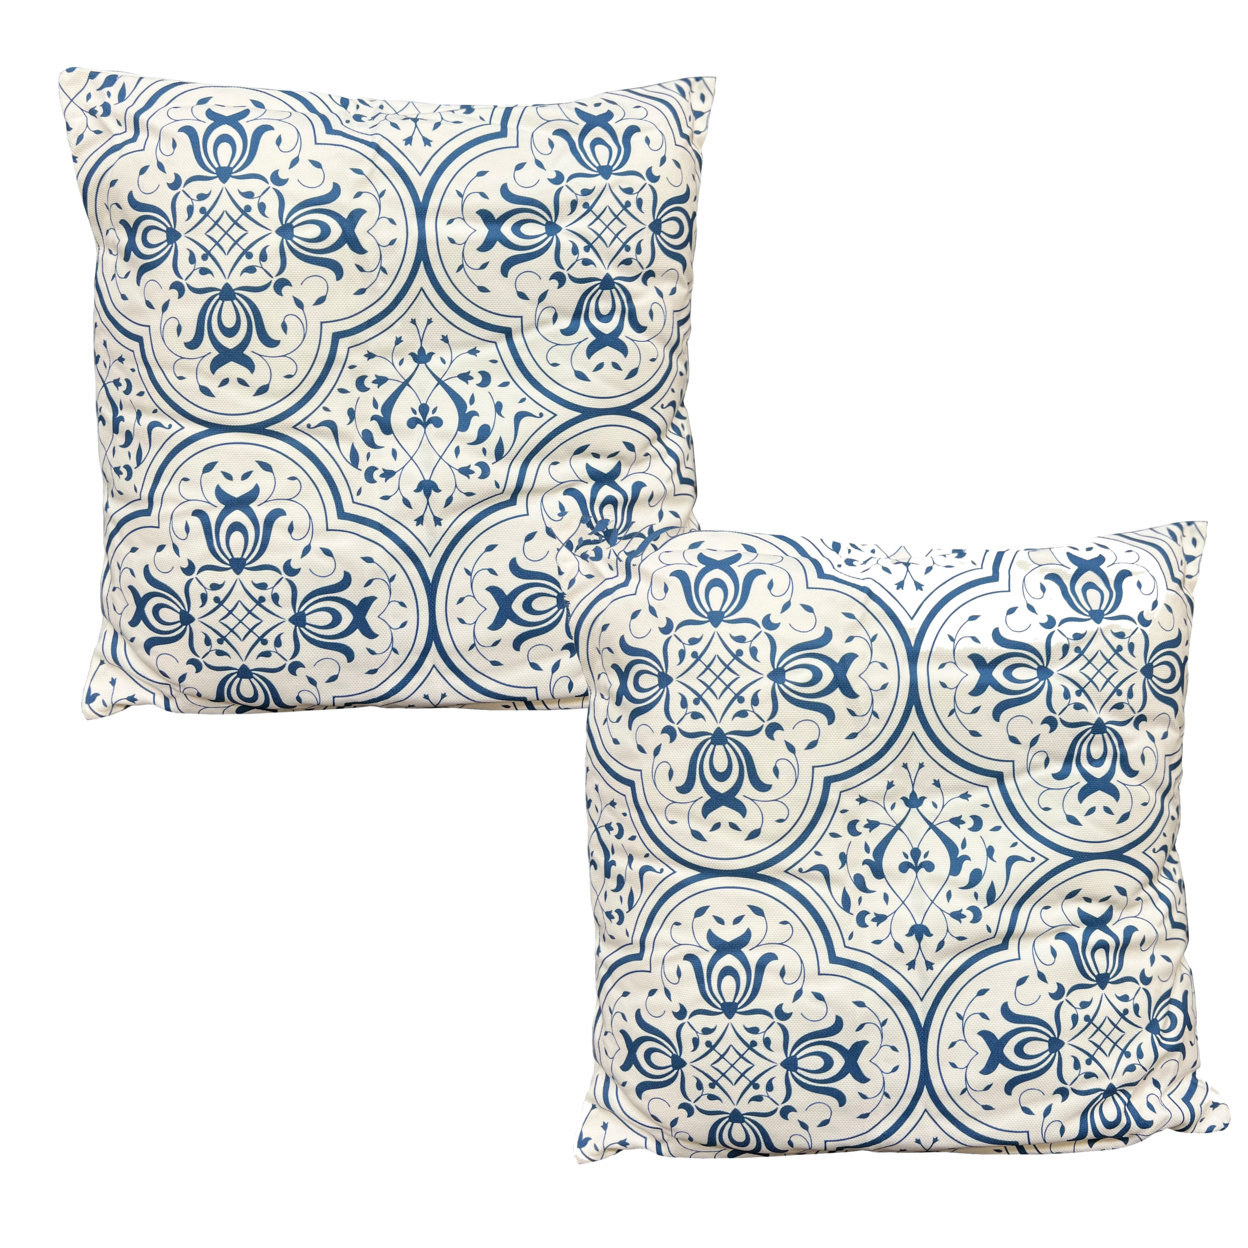 17 X 17 Inch Decorative Square Cotton Accent Throw Pillows, Classic Damask Print, Set Of 2, Blue And White